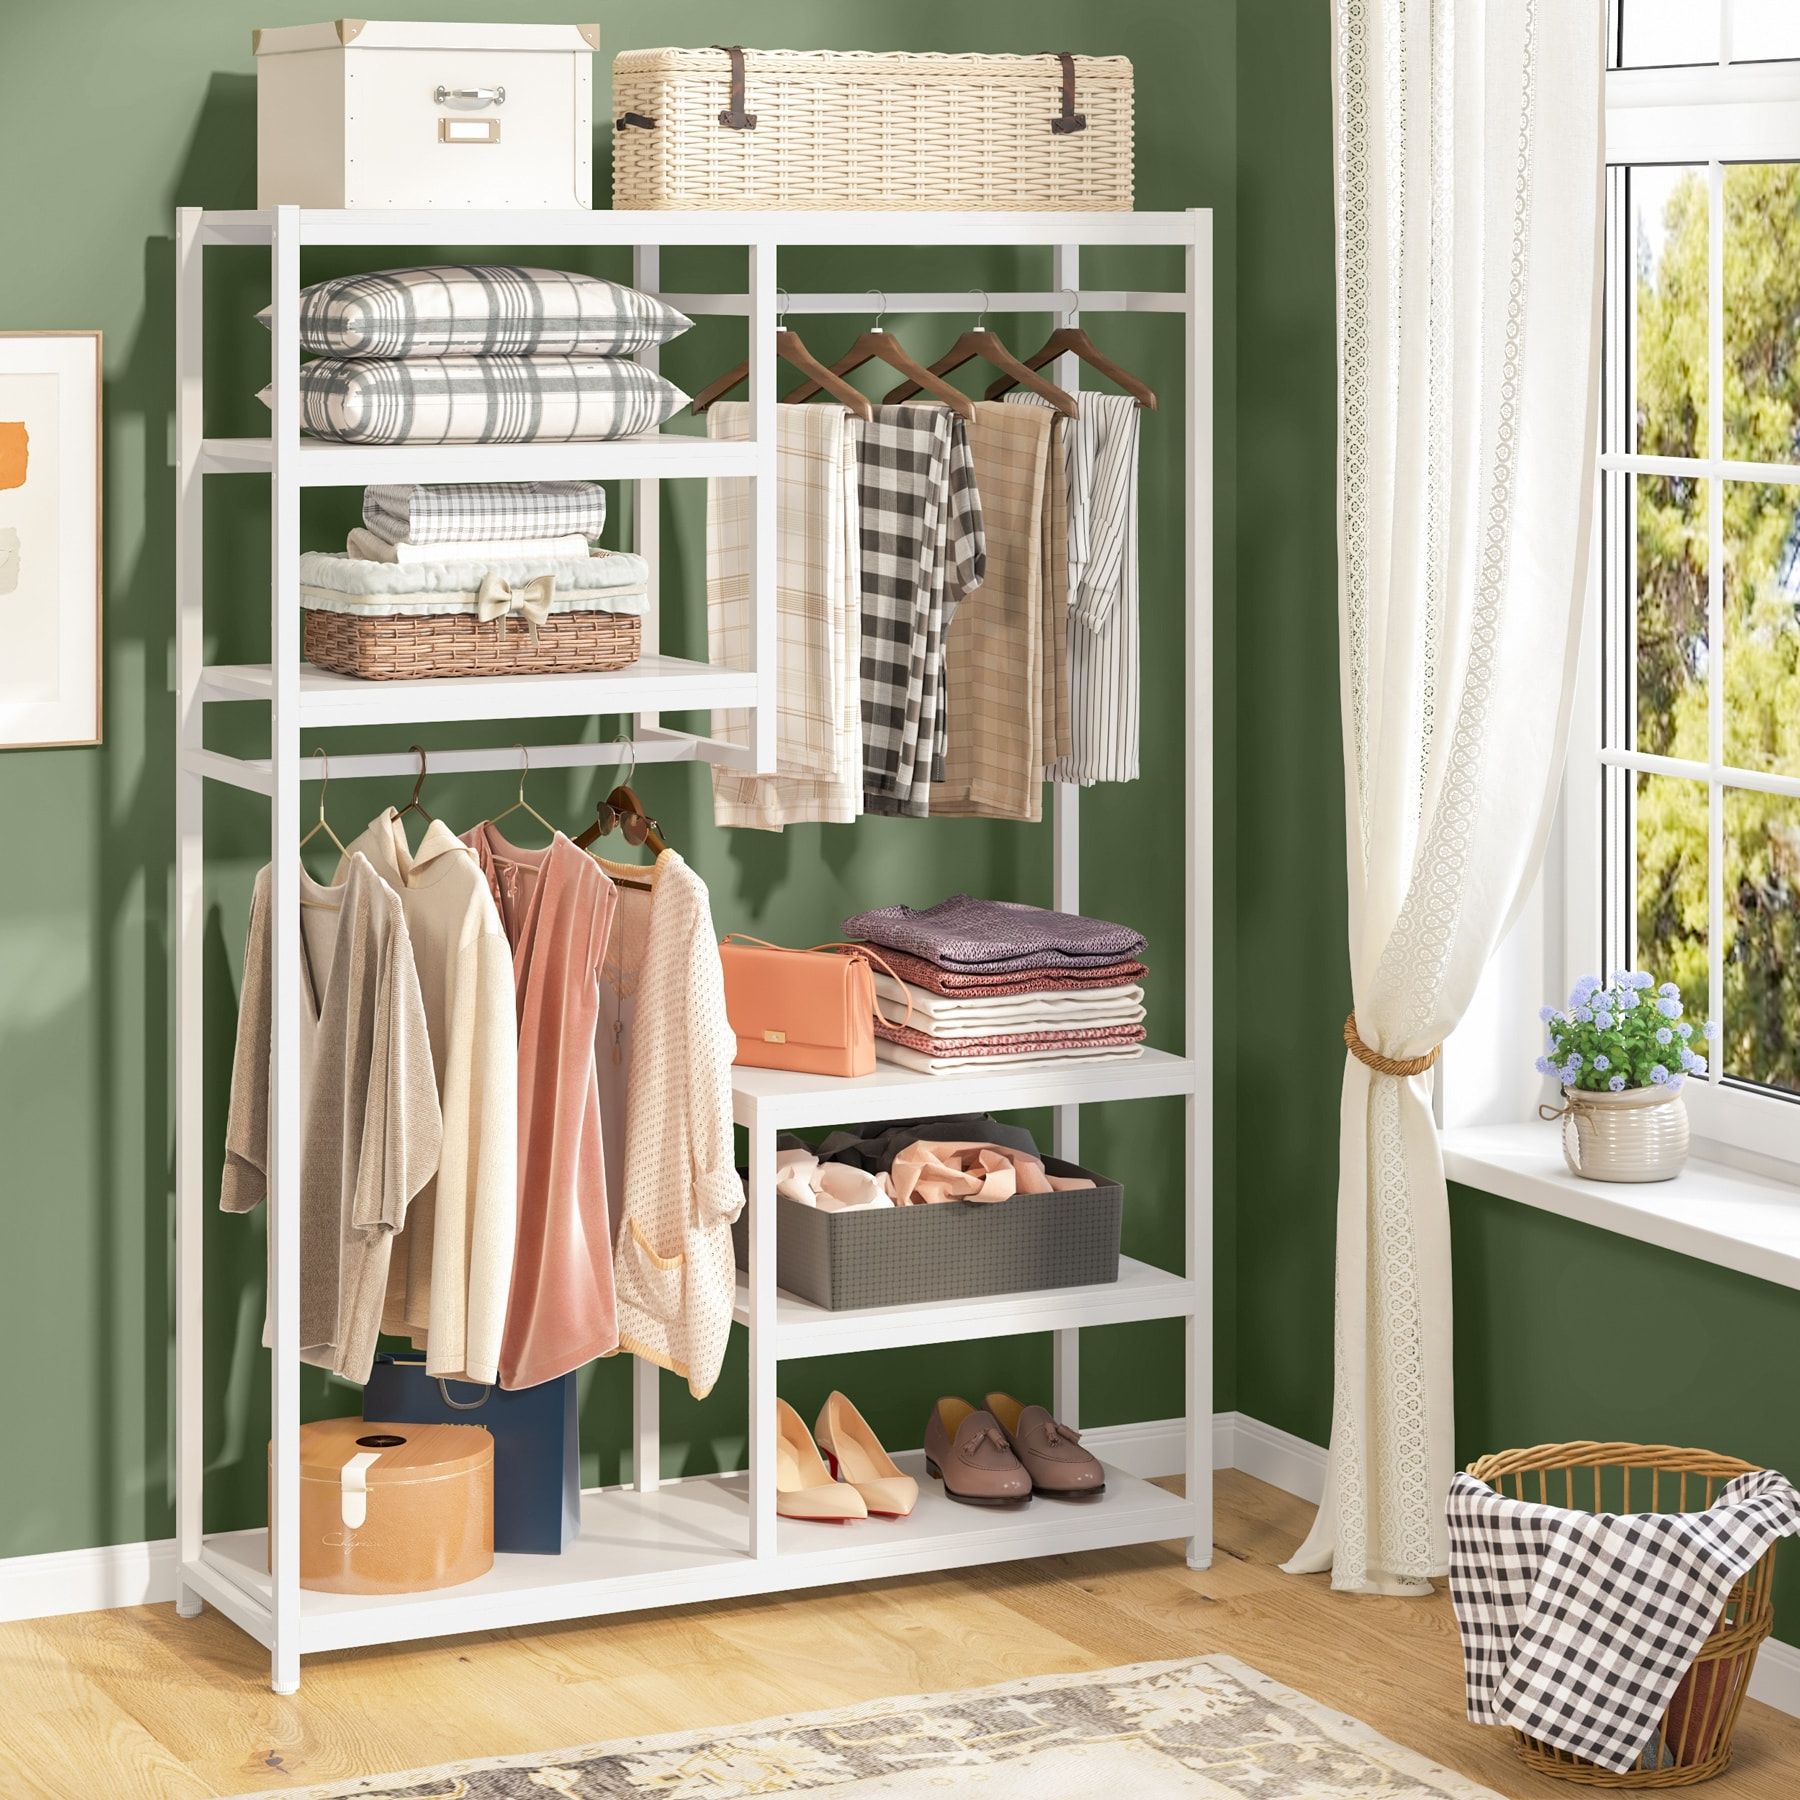 Free Standing Closet Organizer Double Hanging Rod Clothes Garment Racks –  Bed Bath & Beyond – 30537676 Throughout Wardrobes With 3 Hanging Rod (View 10 of 20)